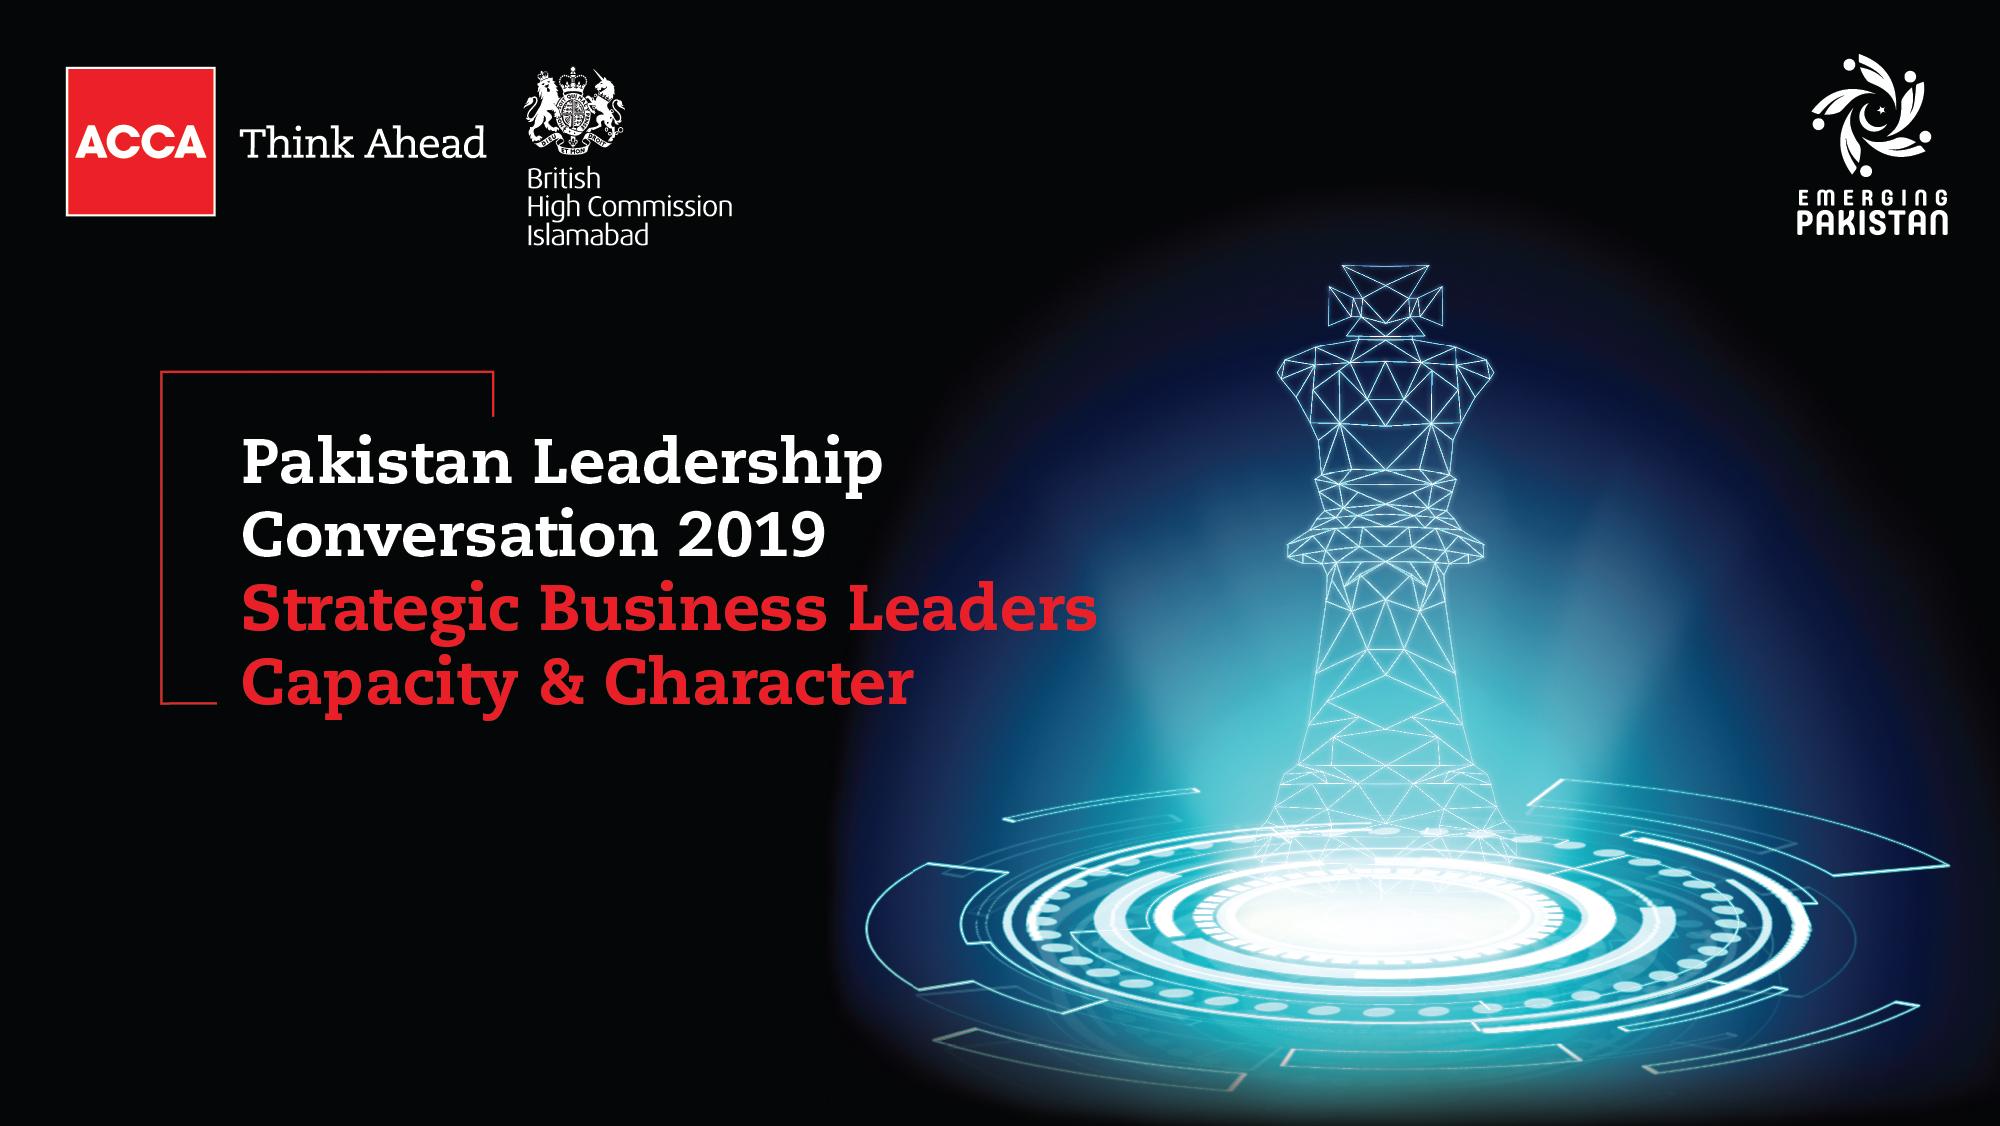 Leaders to meet at Pakistan Leadership Conversation (PLC 2019) to discuss how to shape the future of Pakistan.